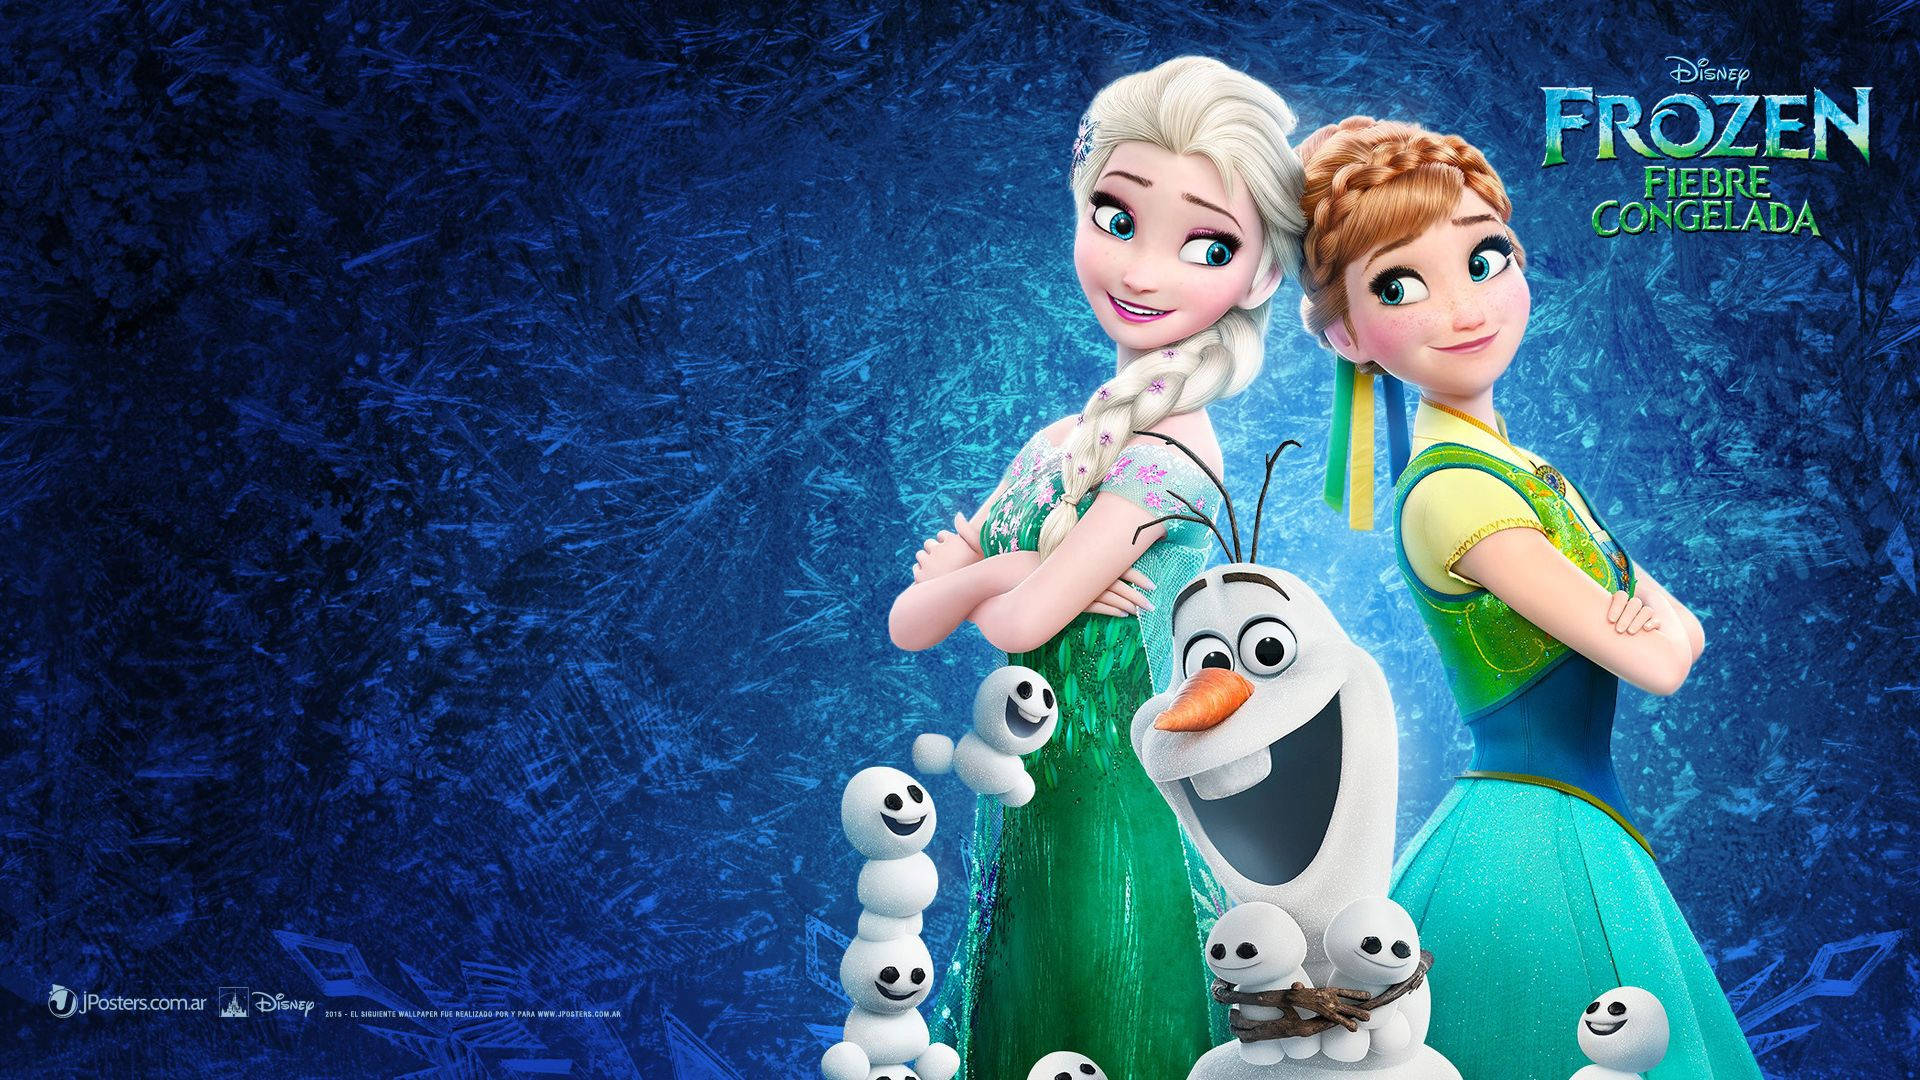 Anna, Elsa, and Olaf embark on a new adventure in Frozen 2. Wallpaper